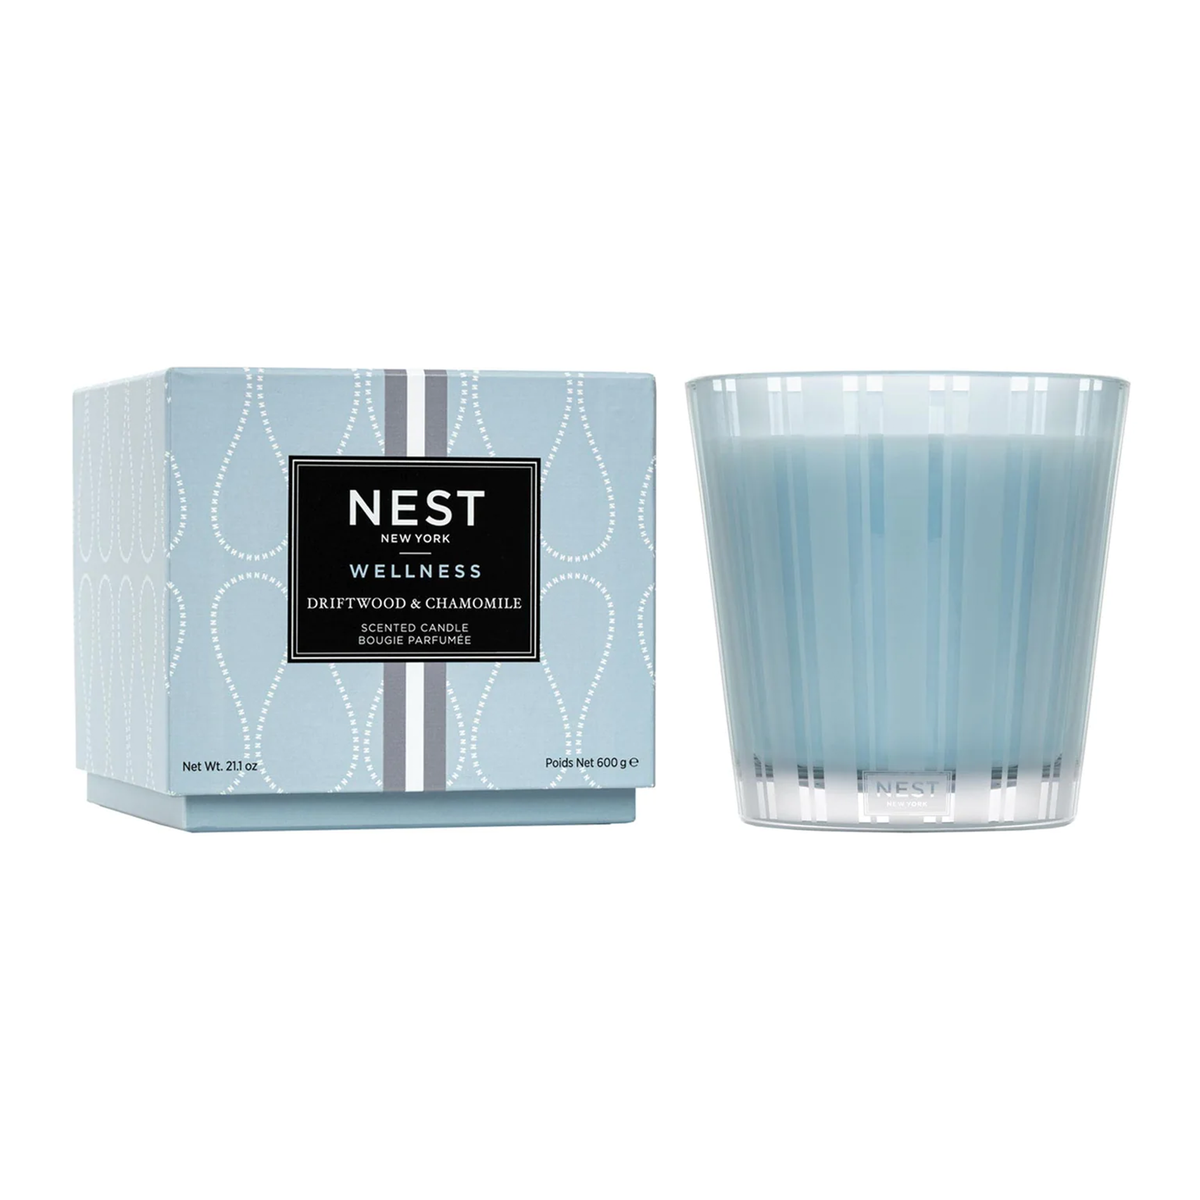 Product Image of Nest New York Driftwood and Chamomile 3-Wick Candle with Box